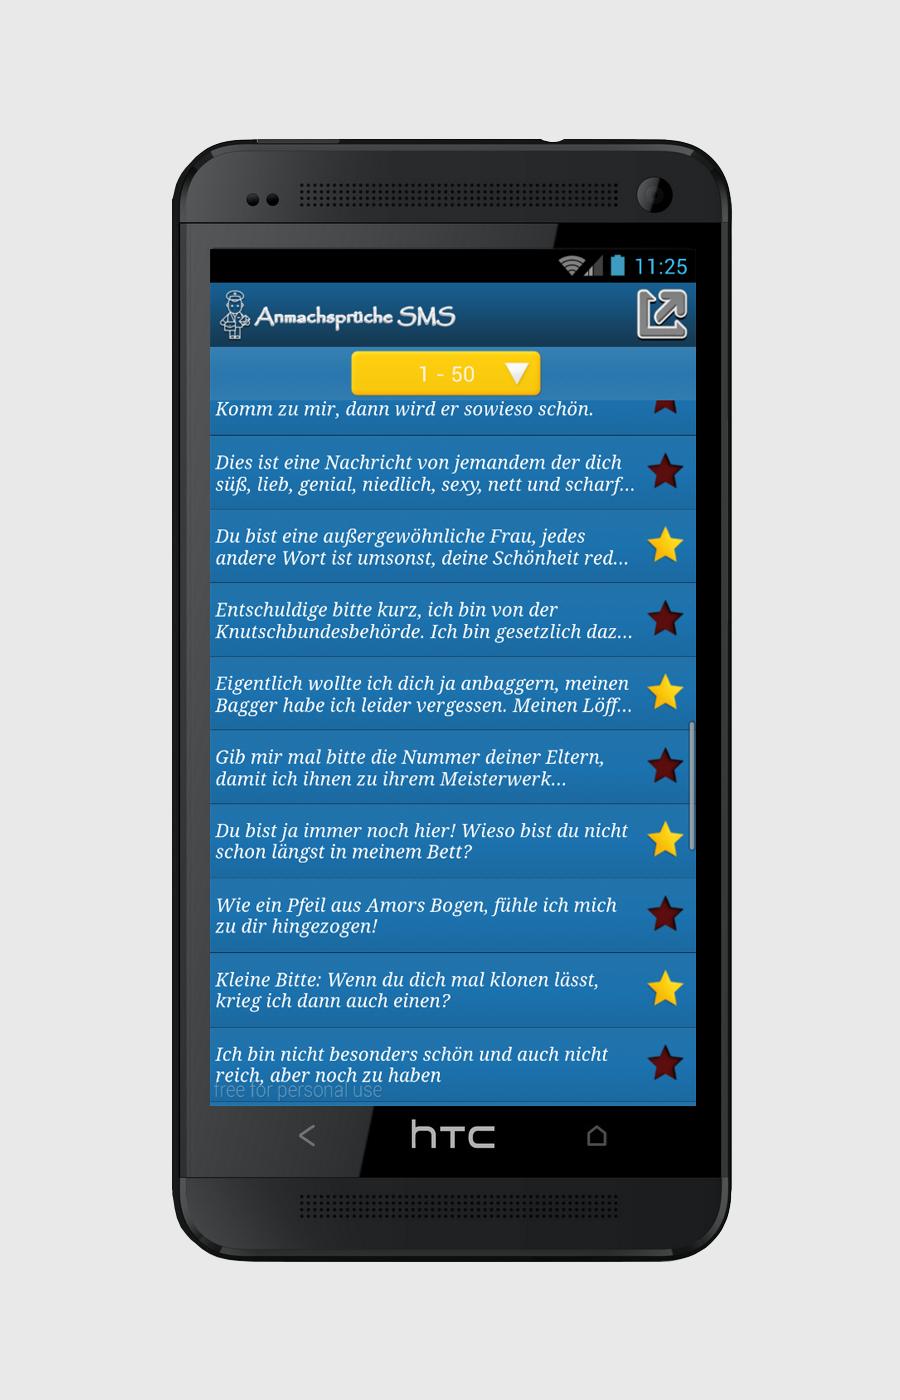 Anmachspruche Sms 2016 For Android Apk Download